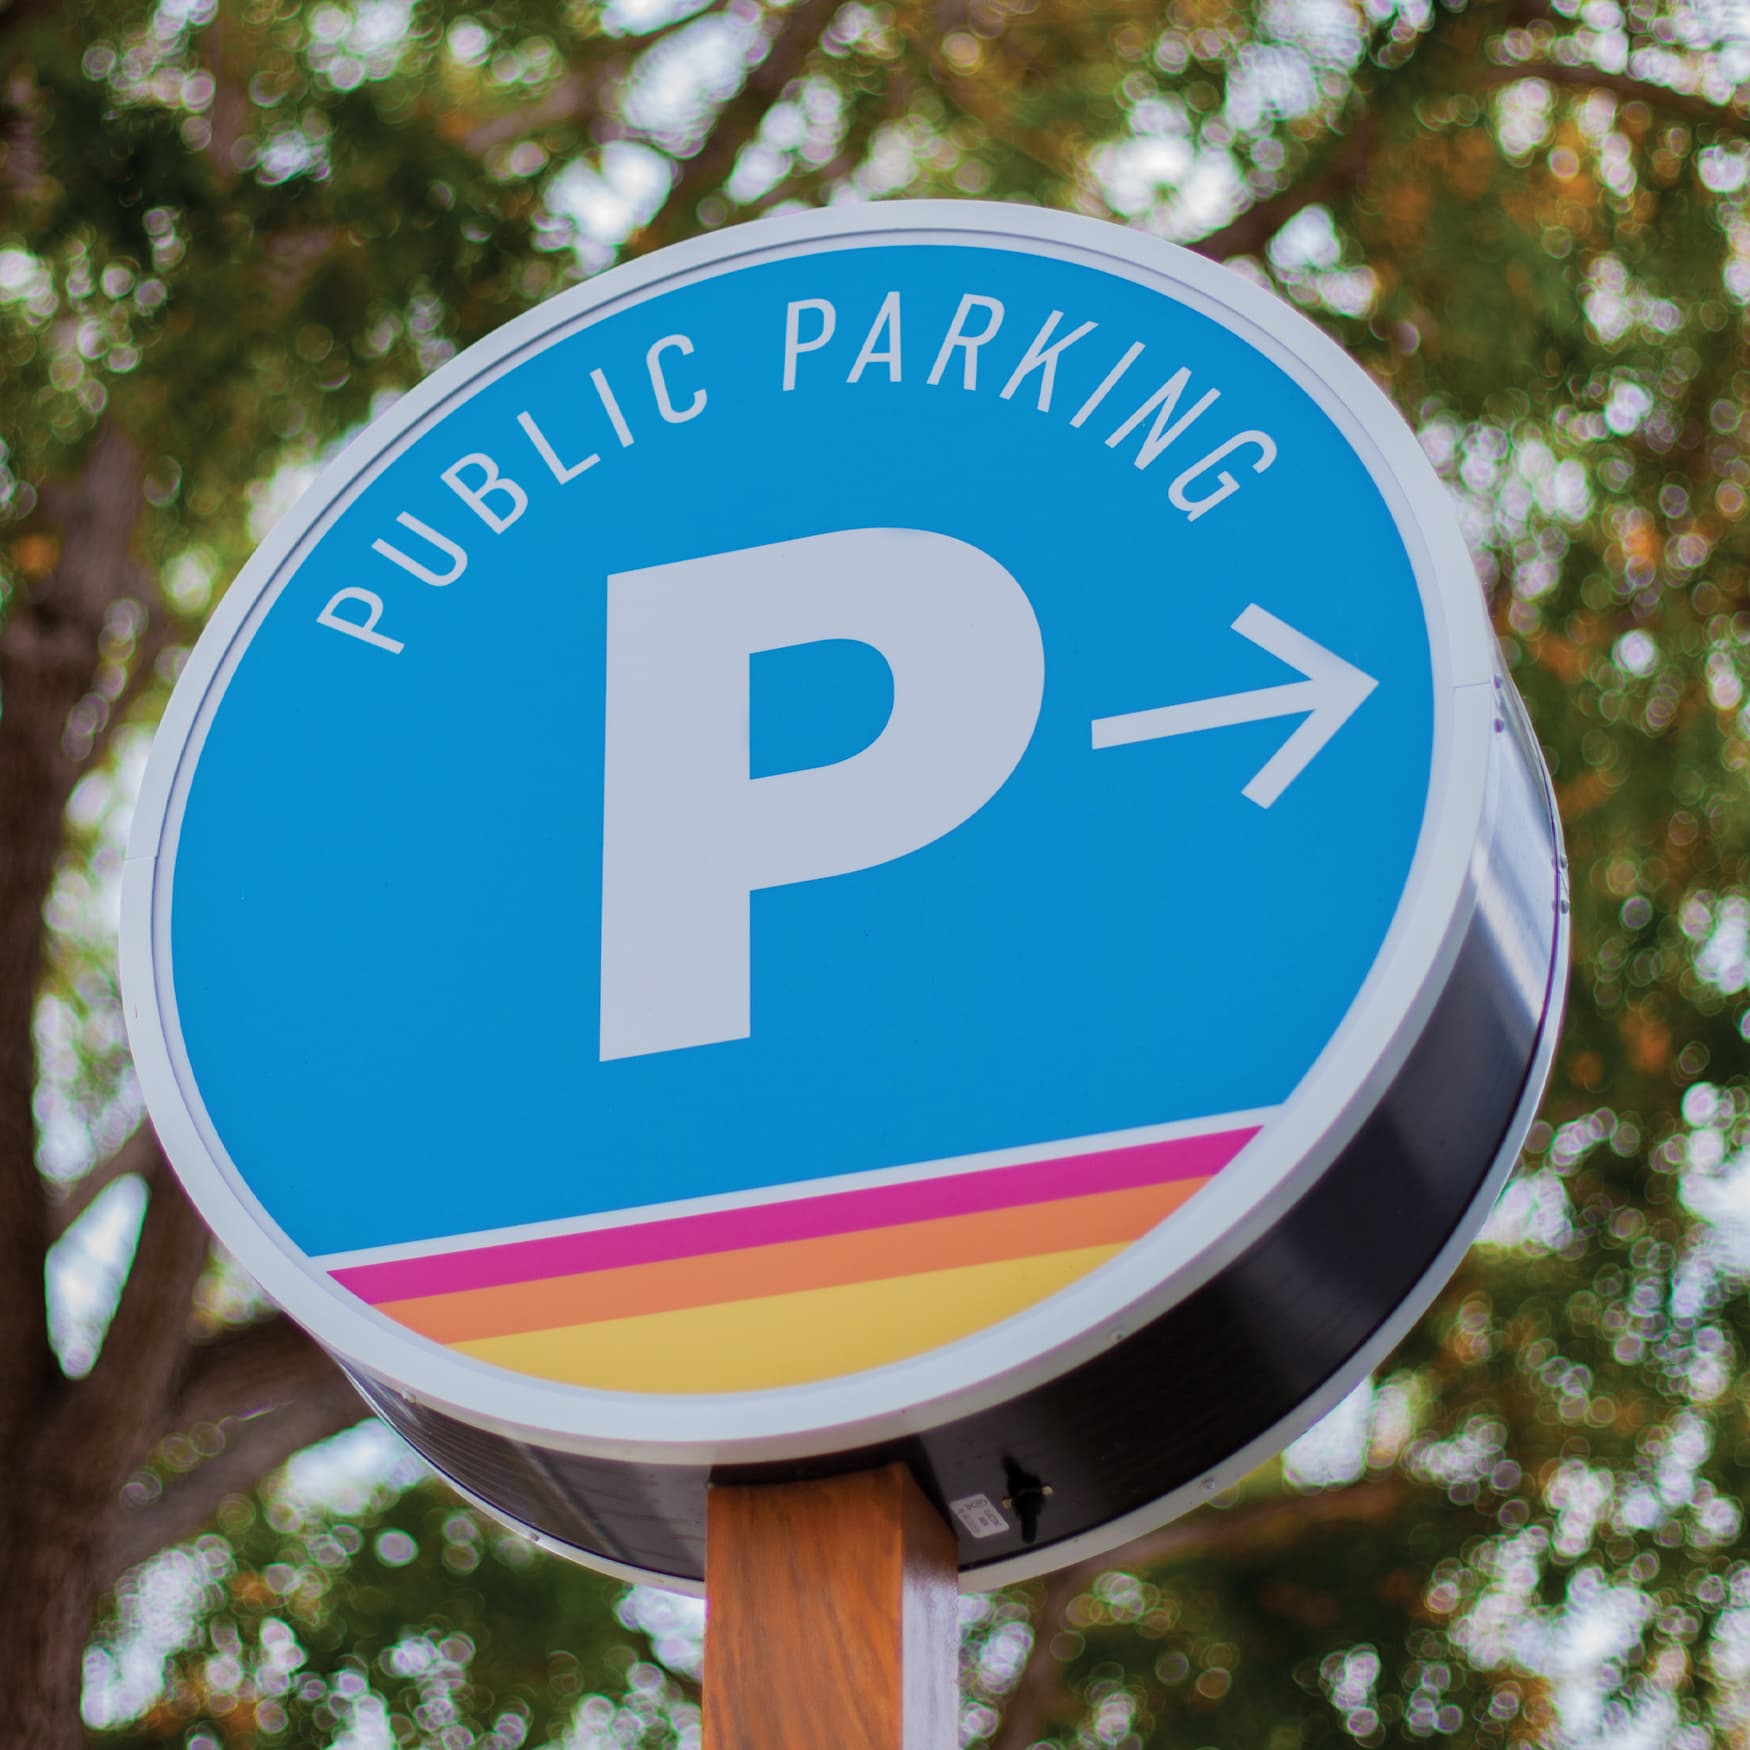 The City of Dana Point branded wayfinding system parking directional sign